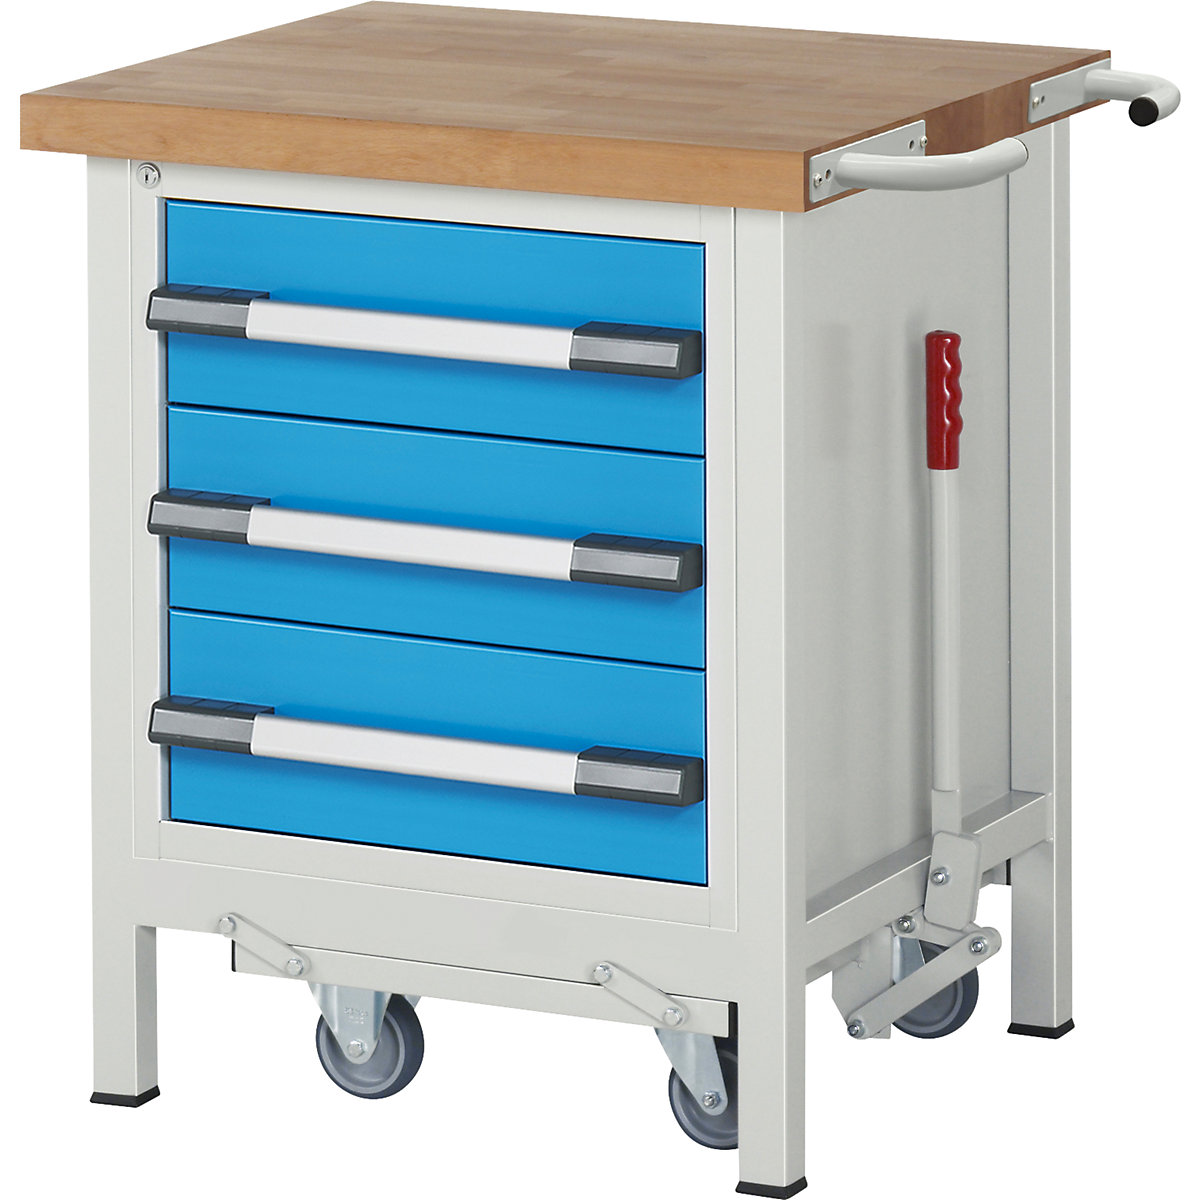 Mobile and lowerable workbench, Series 8000 frame construction – eurokraft pro